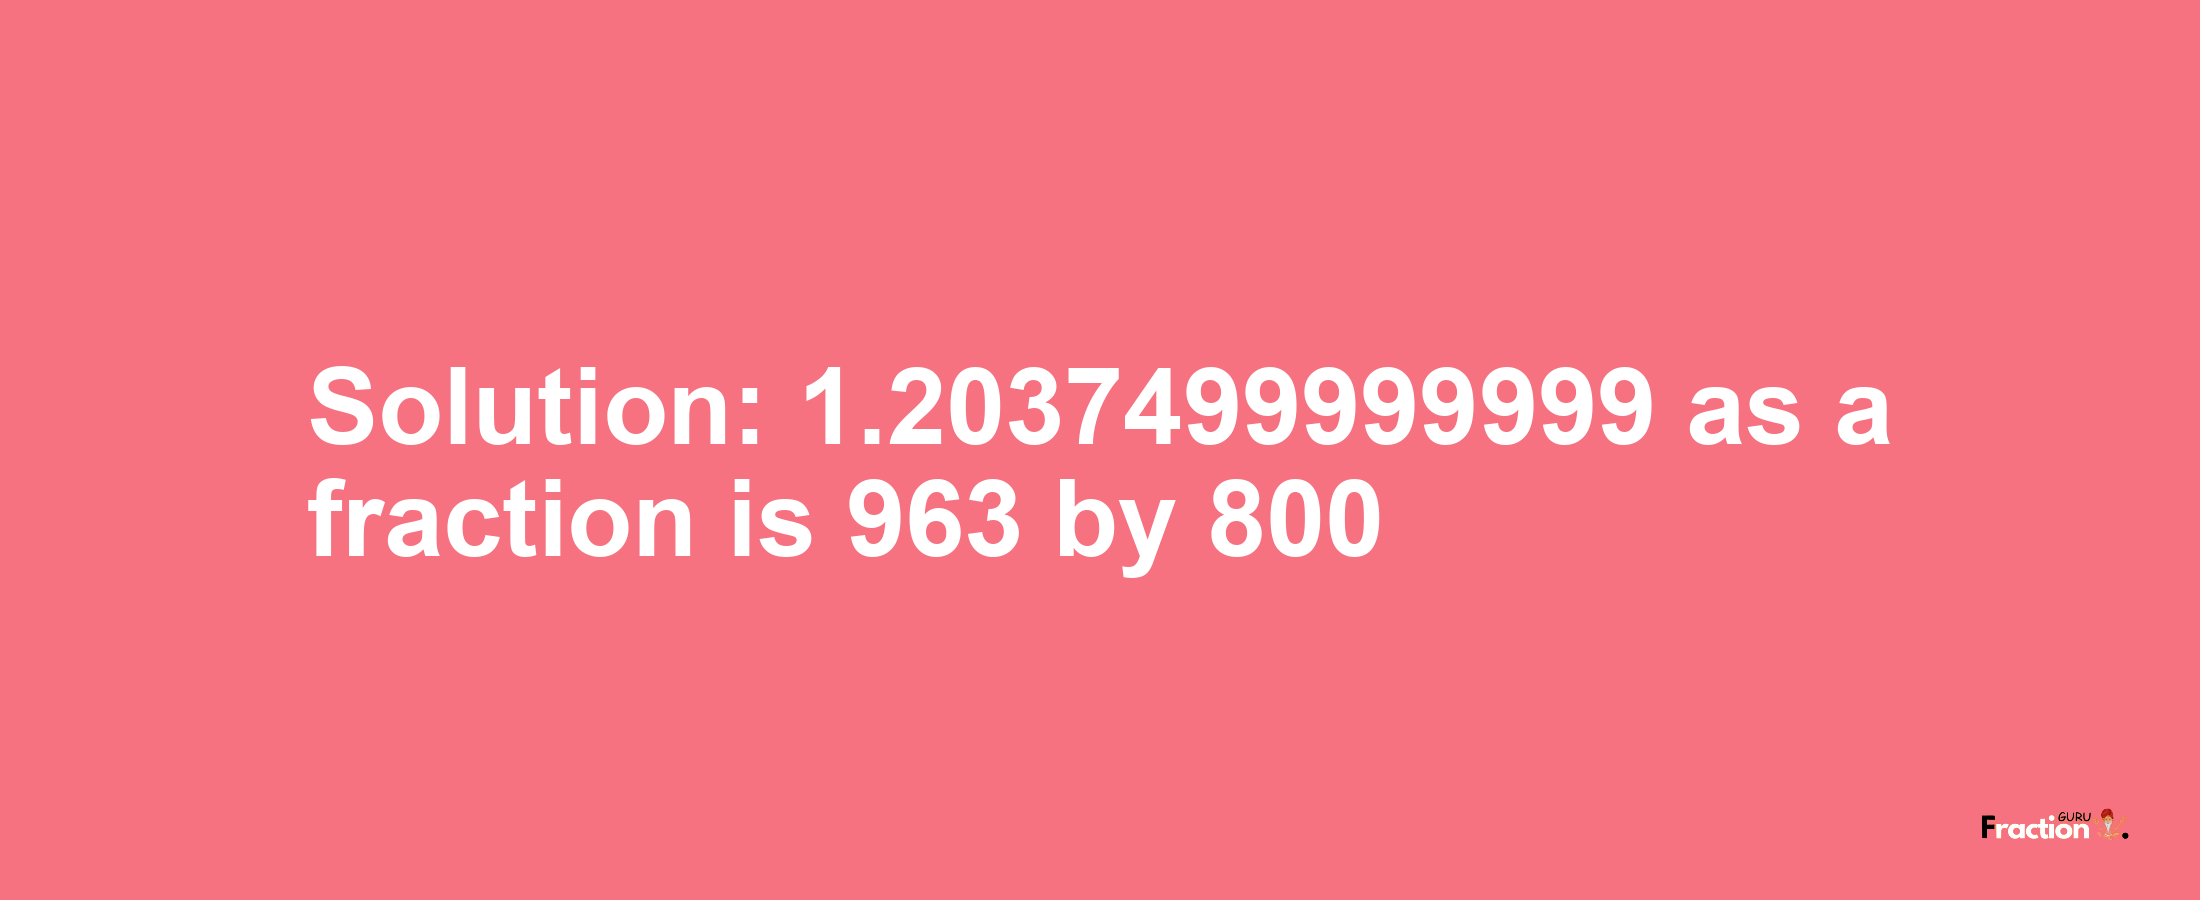 Solution:1.2037499999999 as a fraction is 963/800